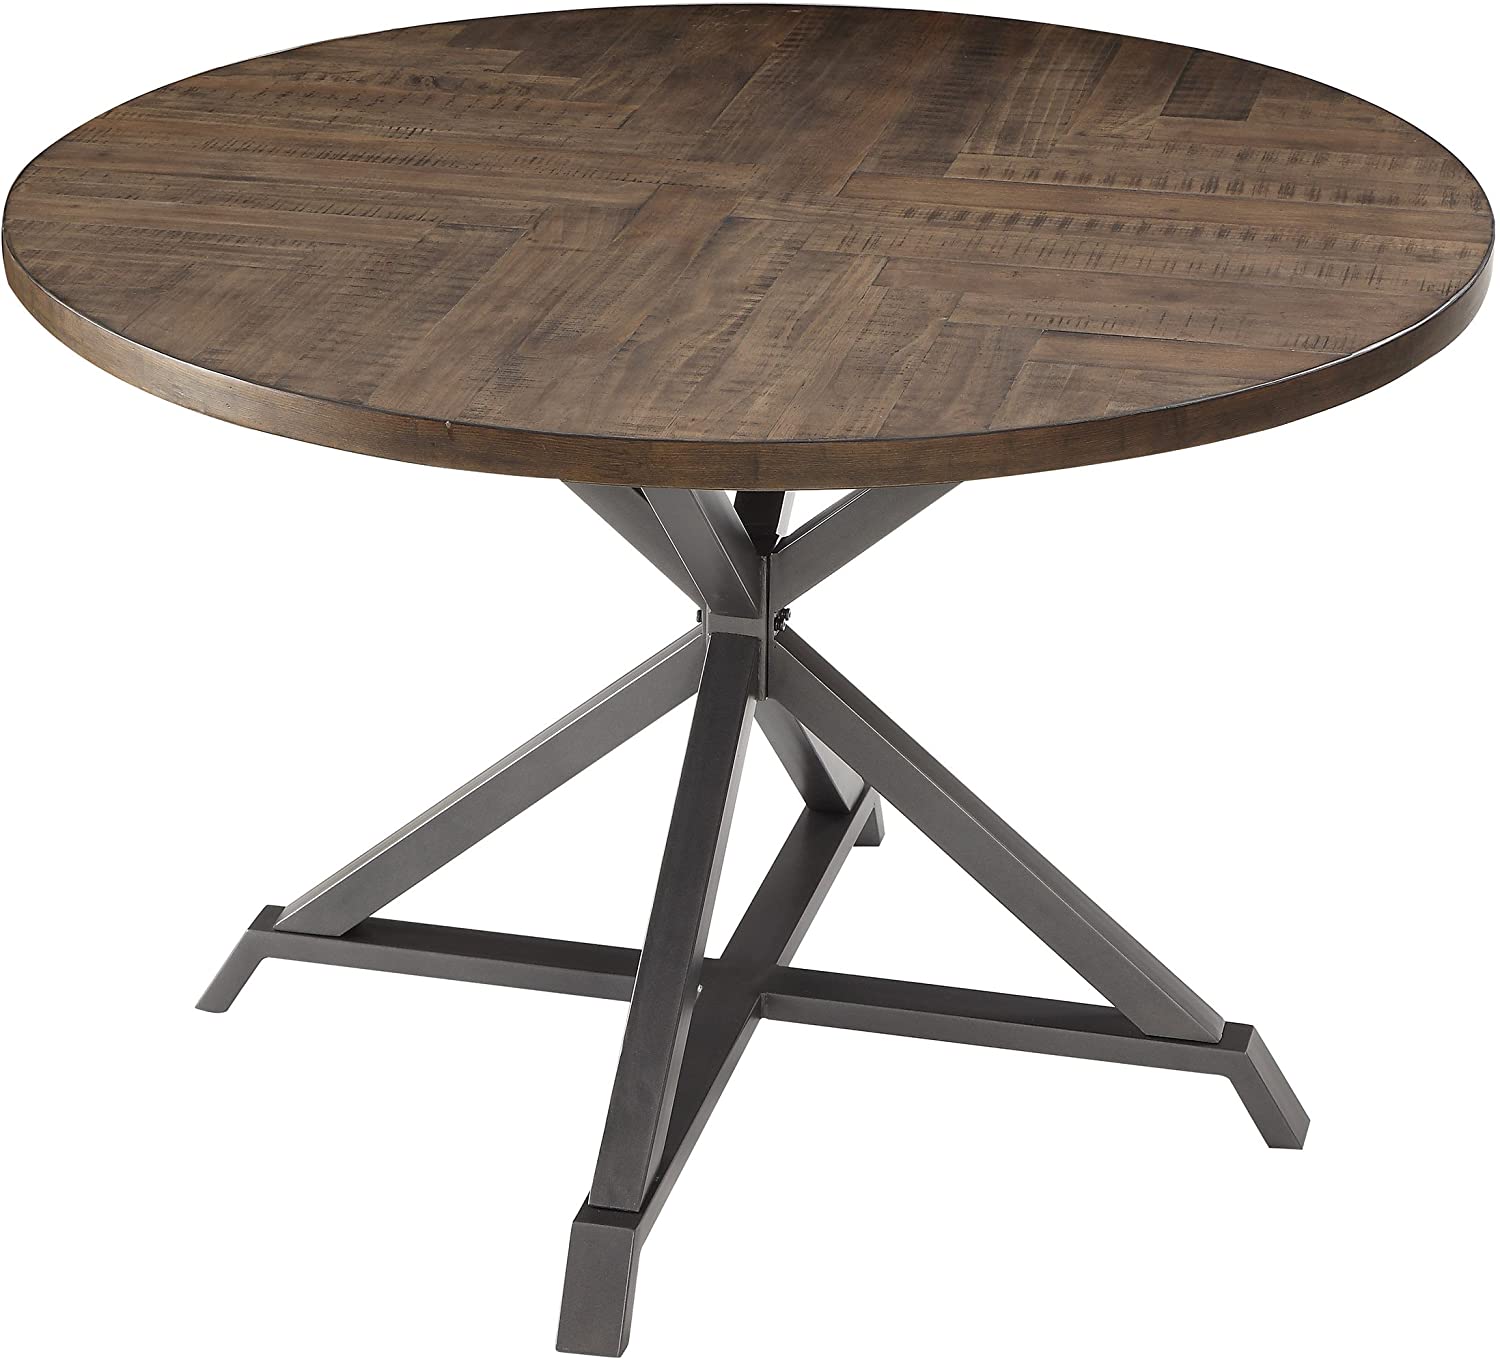 B079Z7Y2XG Homelegance Fideo 45" Round Industrial Style Dining Table, Pine